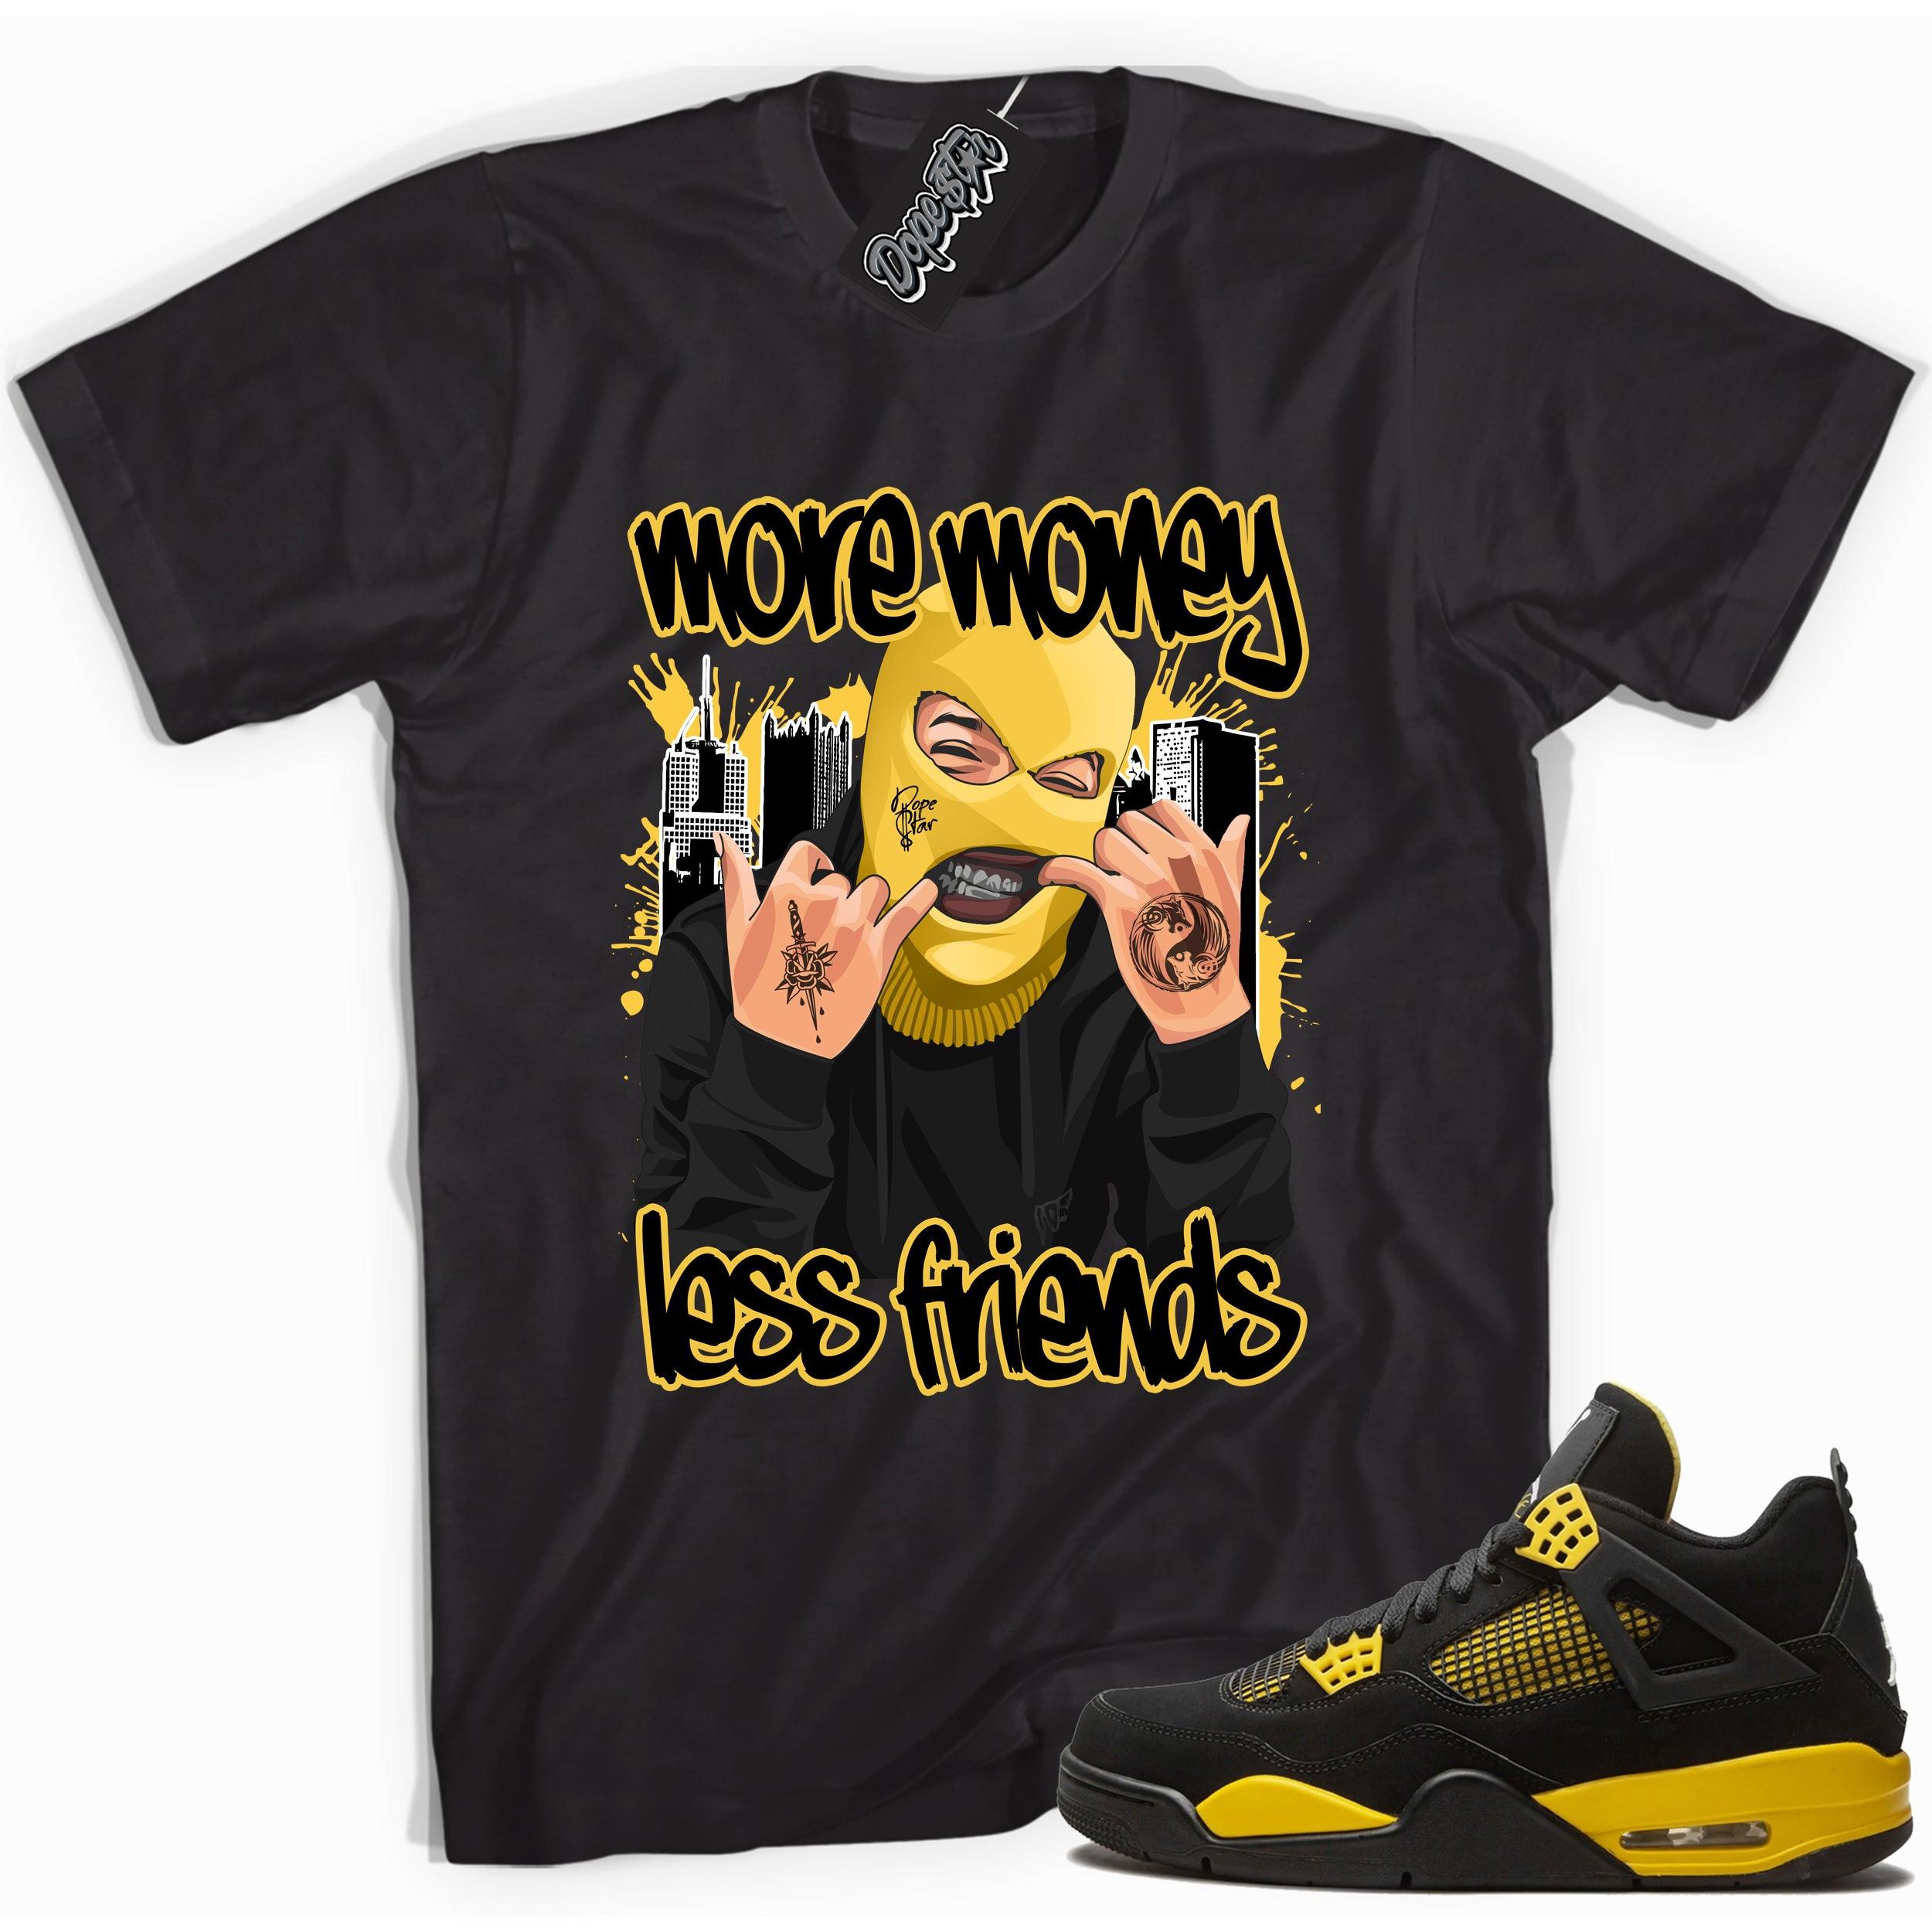 Cool black graphic tee with 'more money less friends' print, that perfectly matches  Air Jordan 4 Thunder sneakers